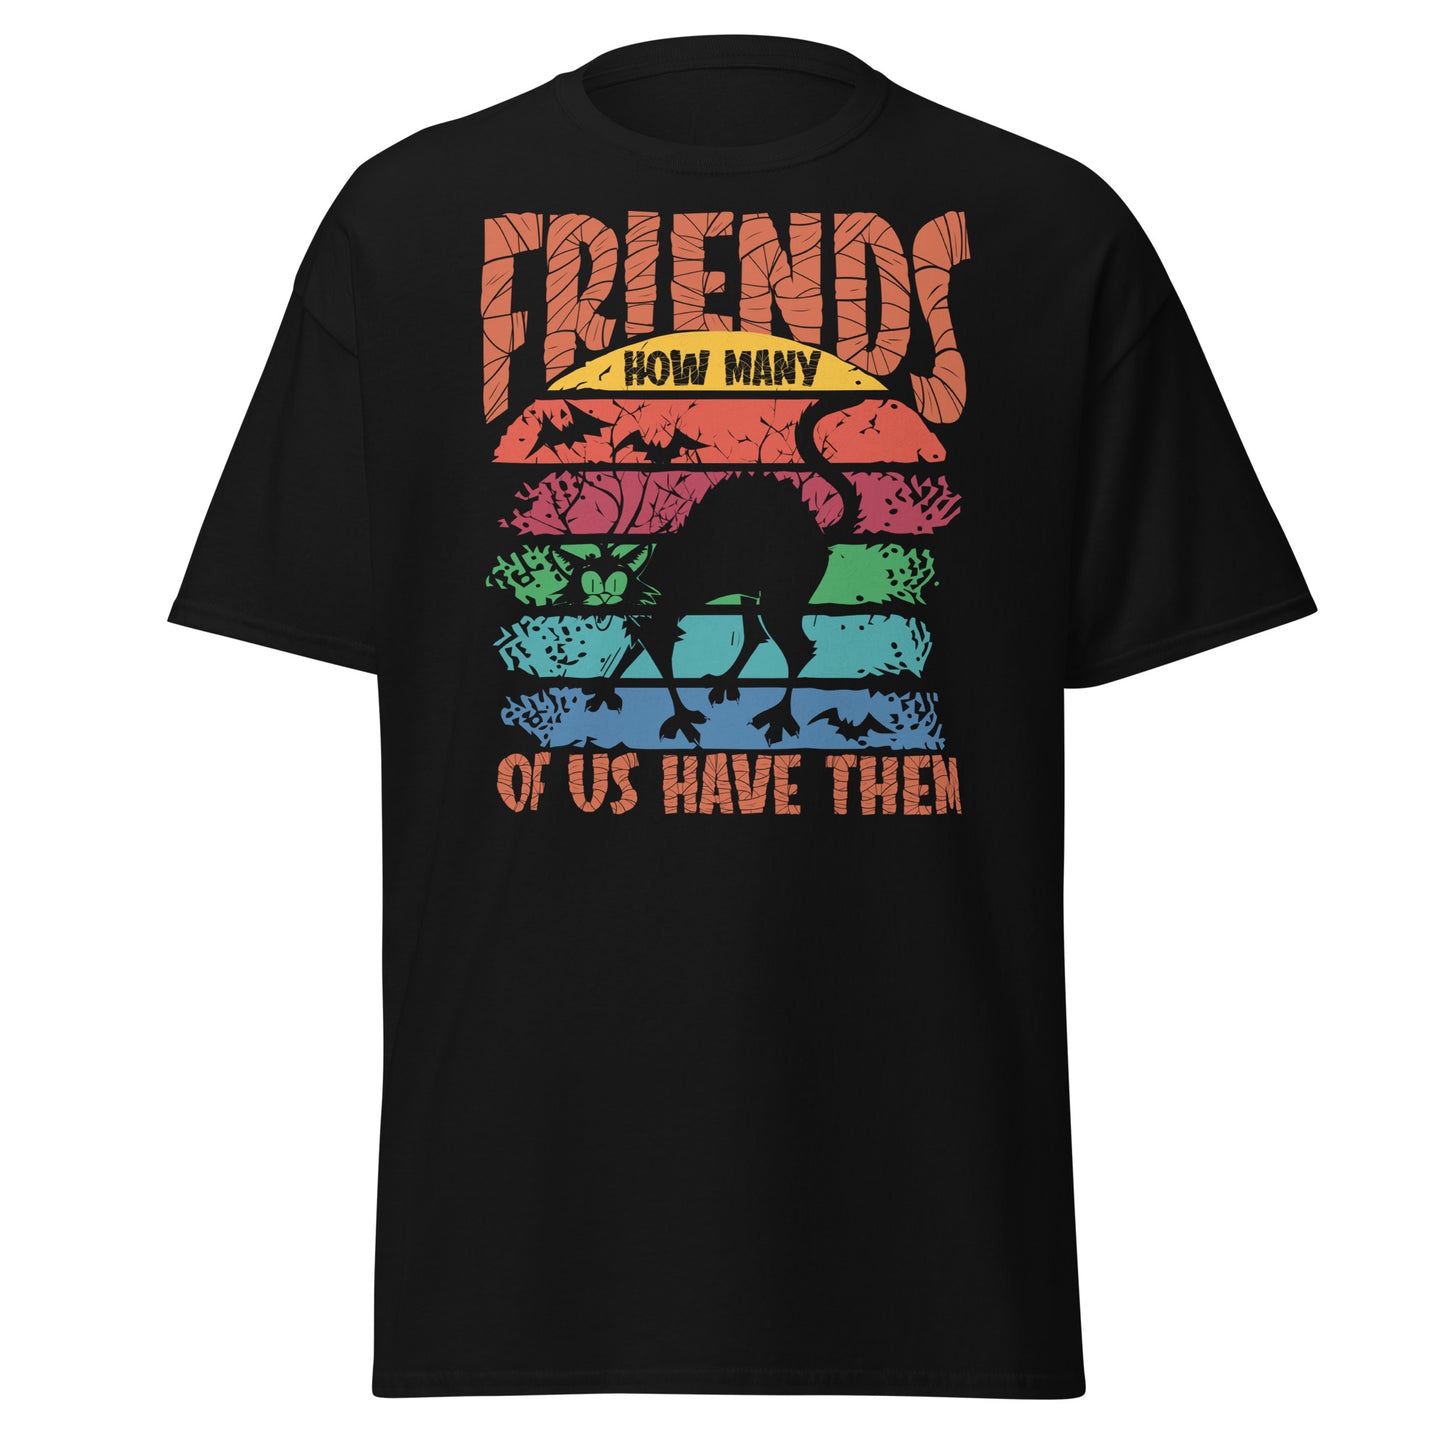 Celebrate with Friends: Halloween Tee - How Many of Us Have Them